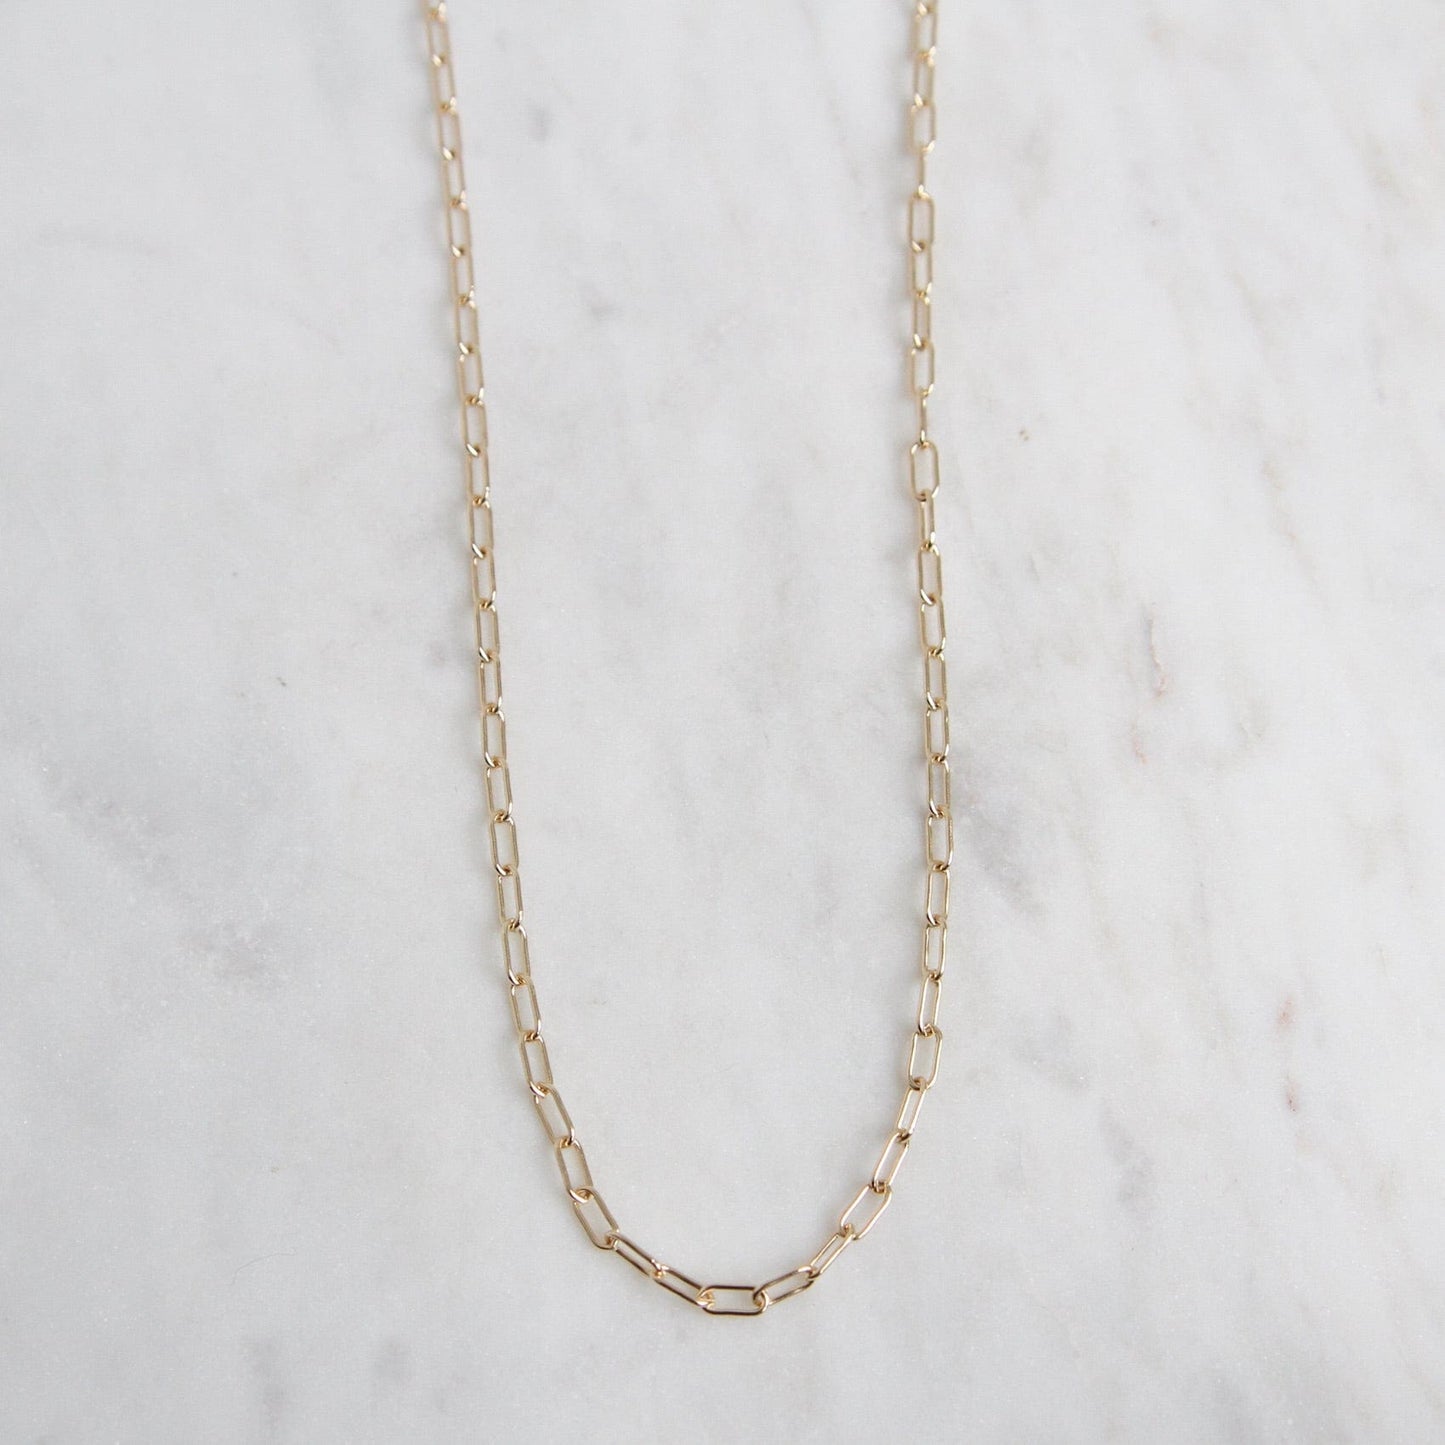 NKL-14K 14k Yellow Gold Link Chain ~ 18" 2.6mm